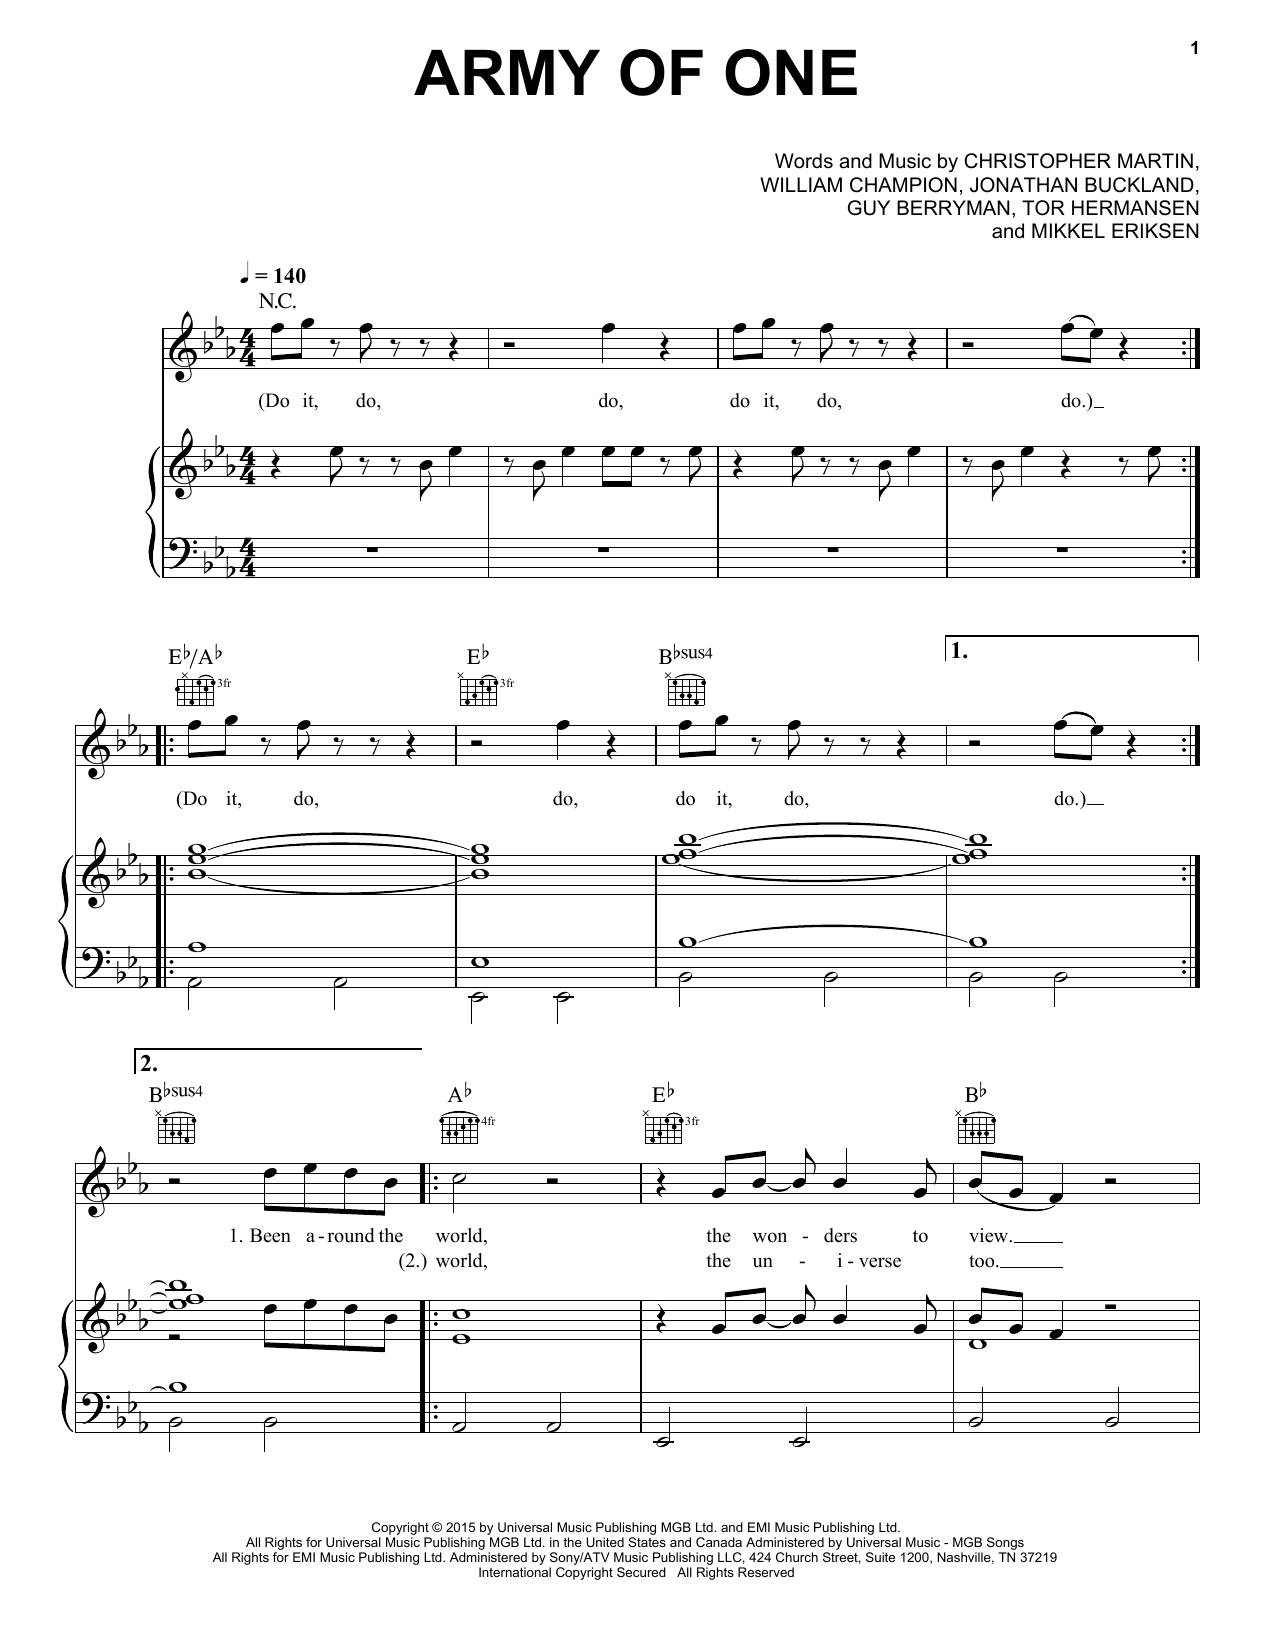 Coldplay "Army Of One" Sheet Music | Download PDF Score 164818